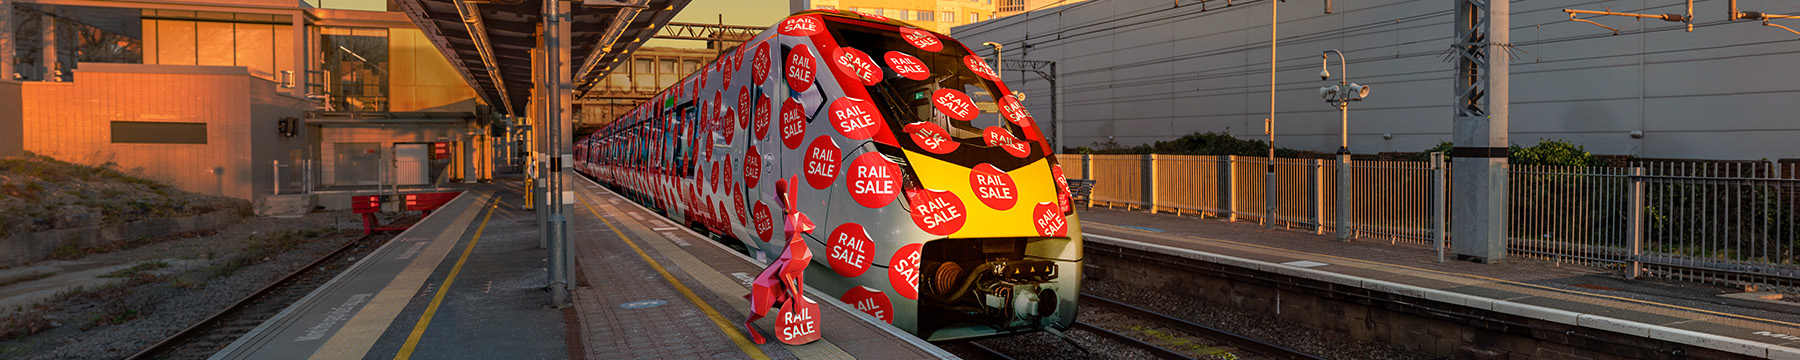 hare covering Greater Anglia train in lots of rail sale stickers